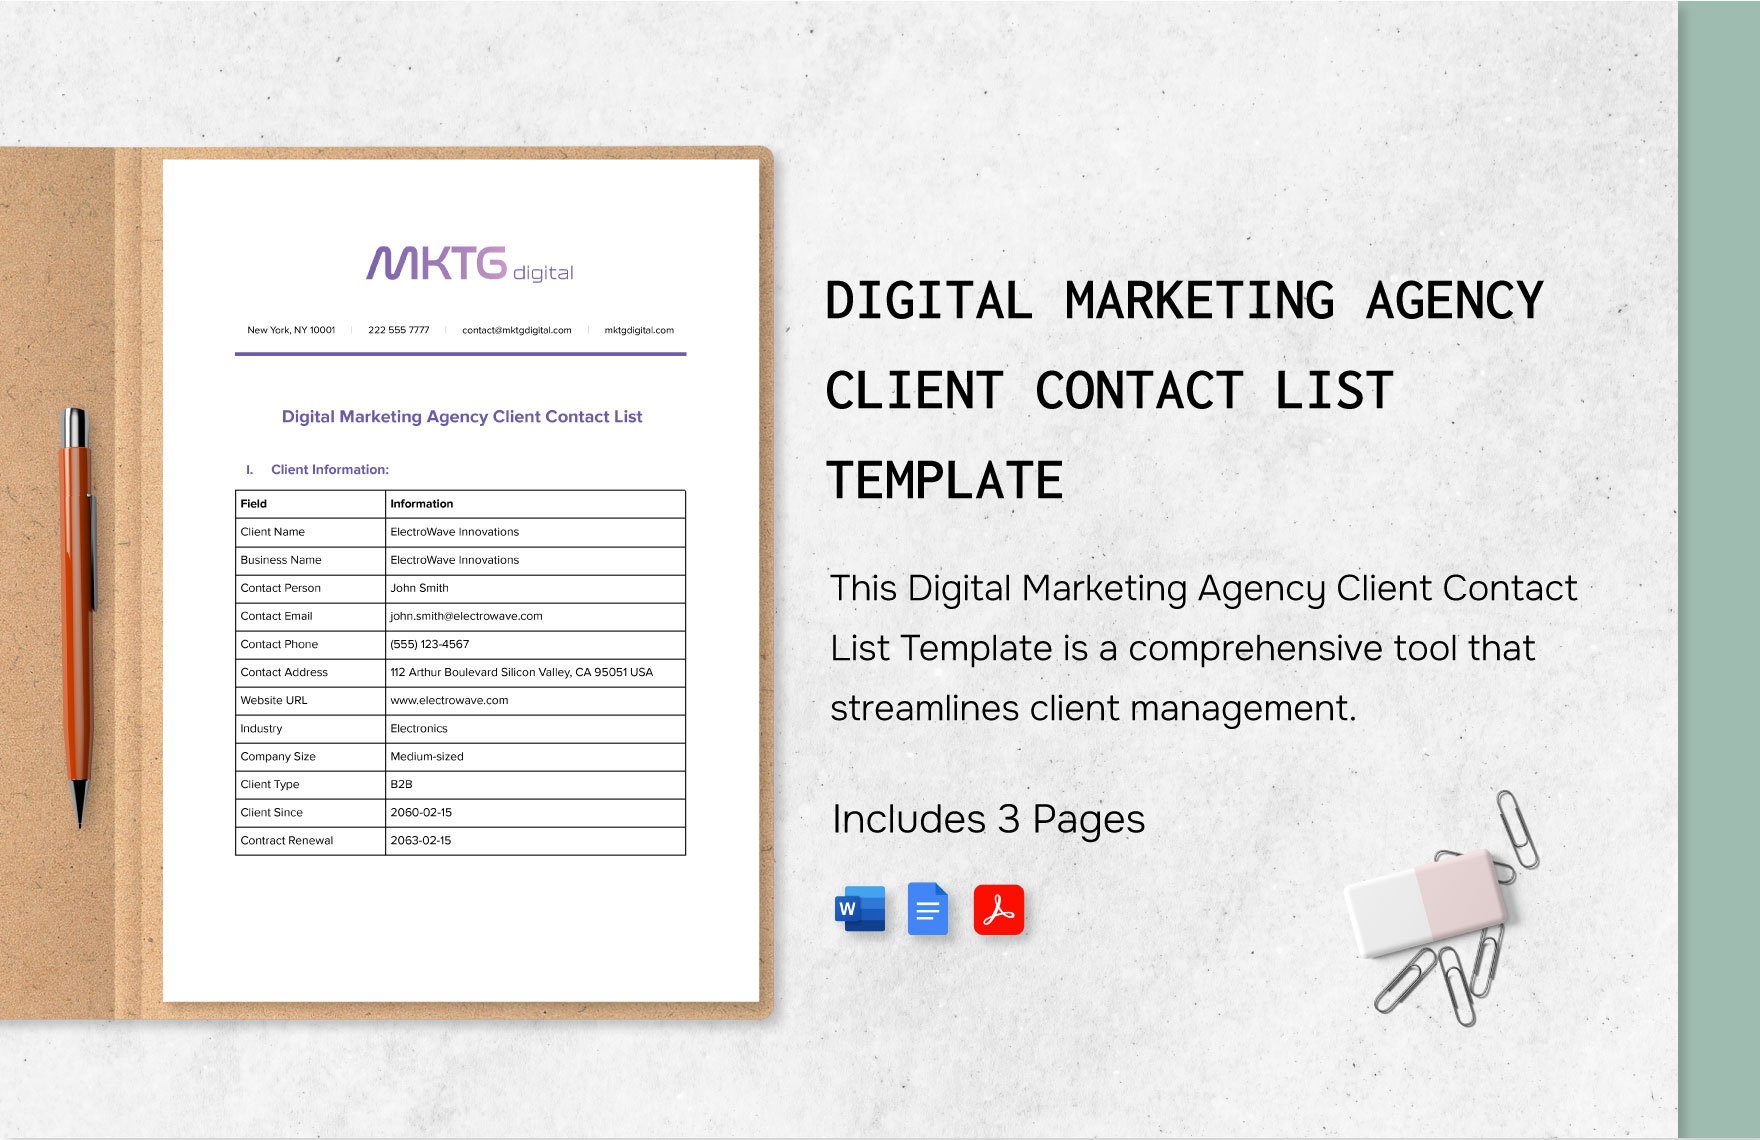 Digital Marketing Agency Client Contact List Template in Word, Google Docs, PDF